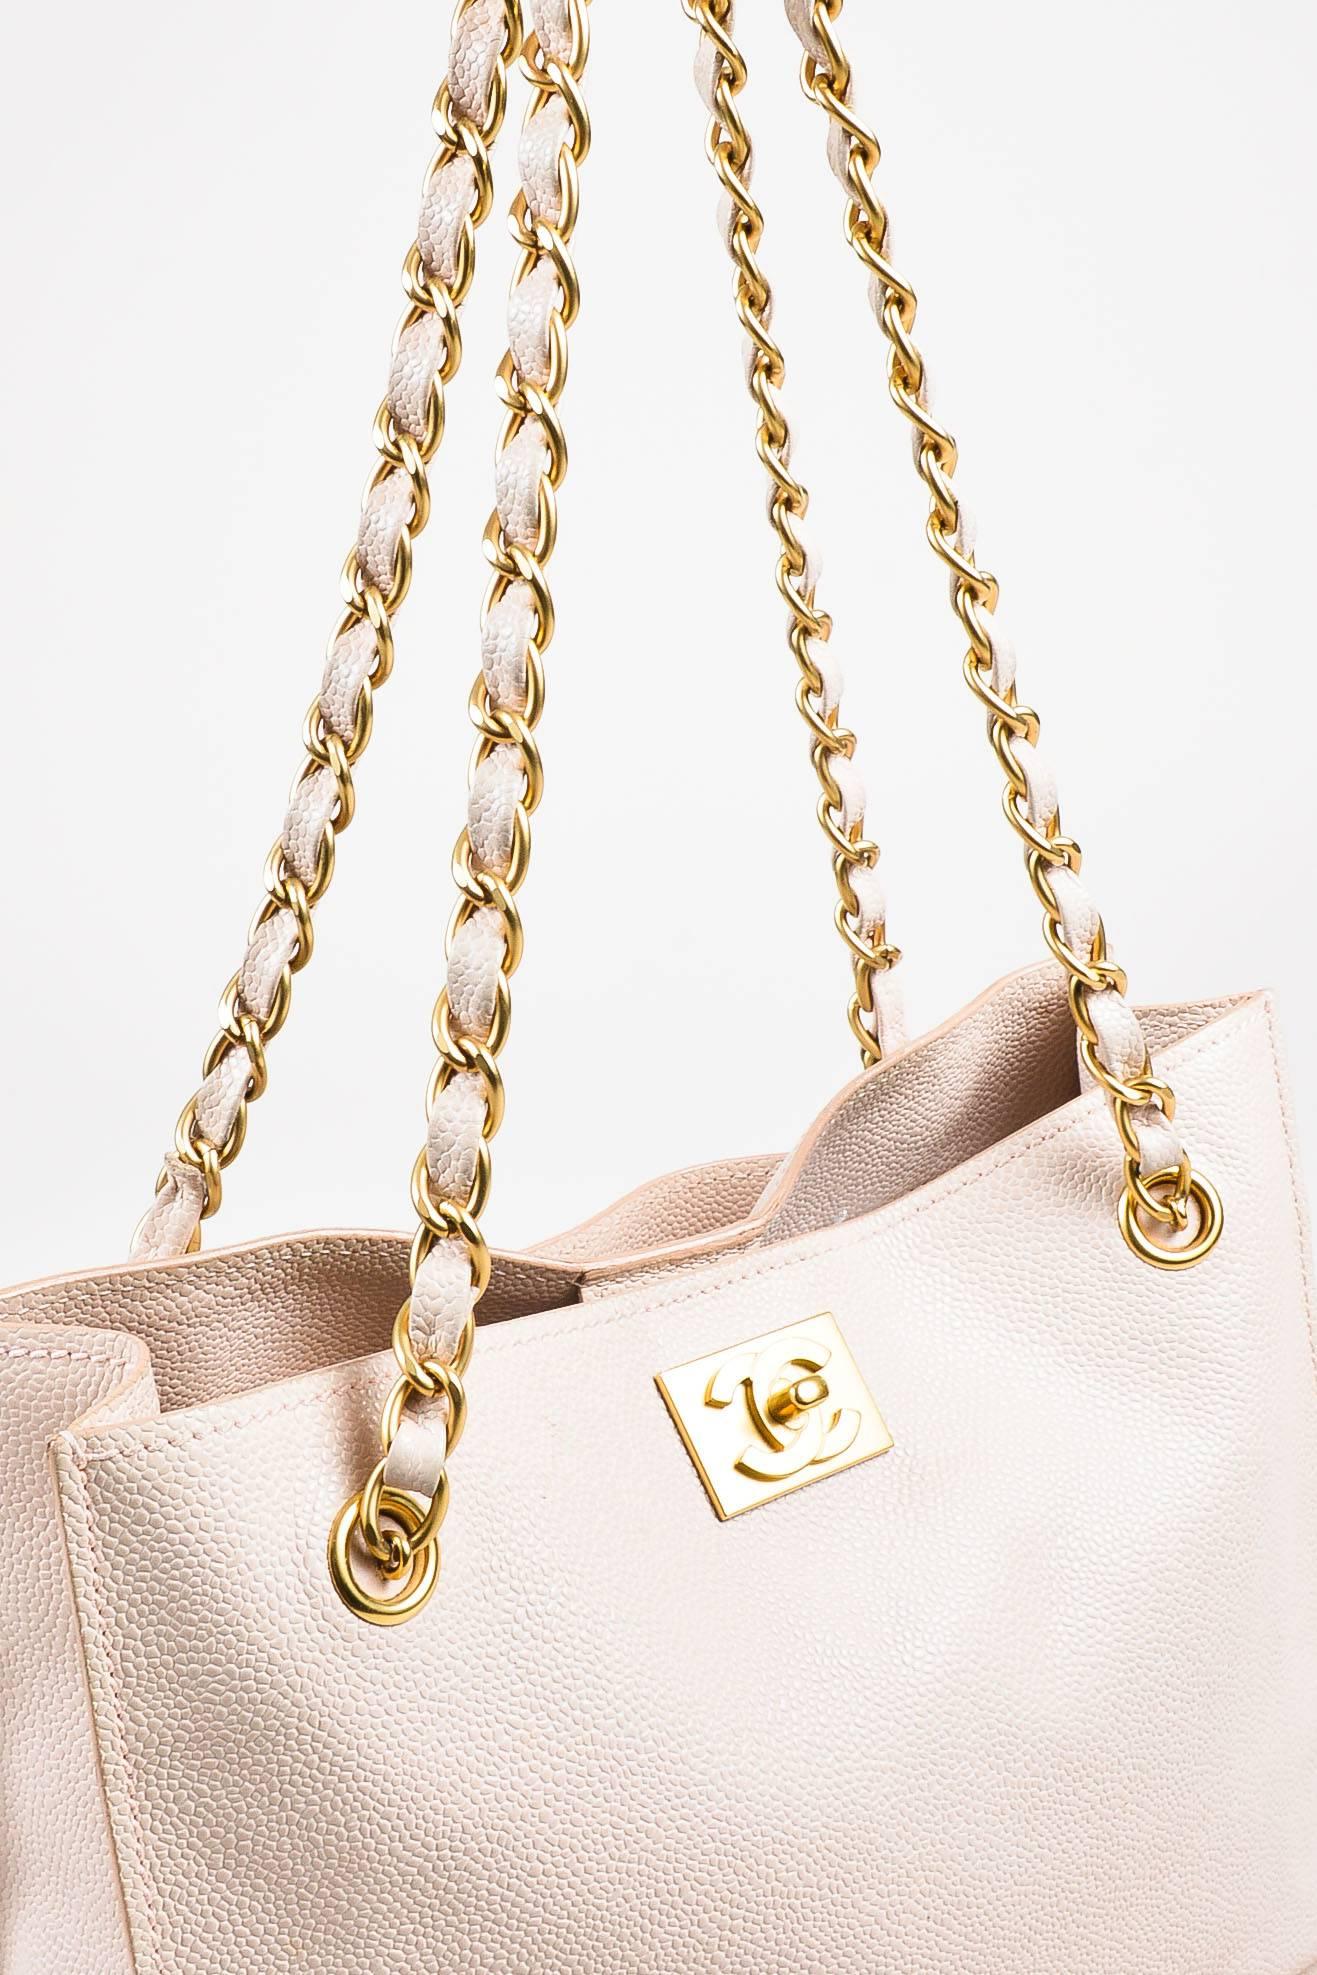 White Chanel Blush Pink & Brushed Gold Tone Caviar Leather 'CC' Shopper Tote For Sale